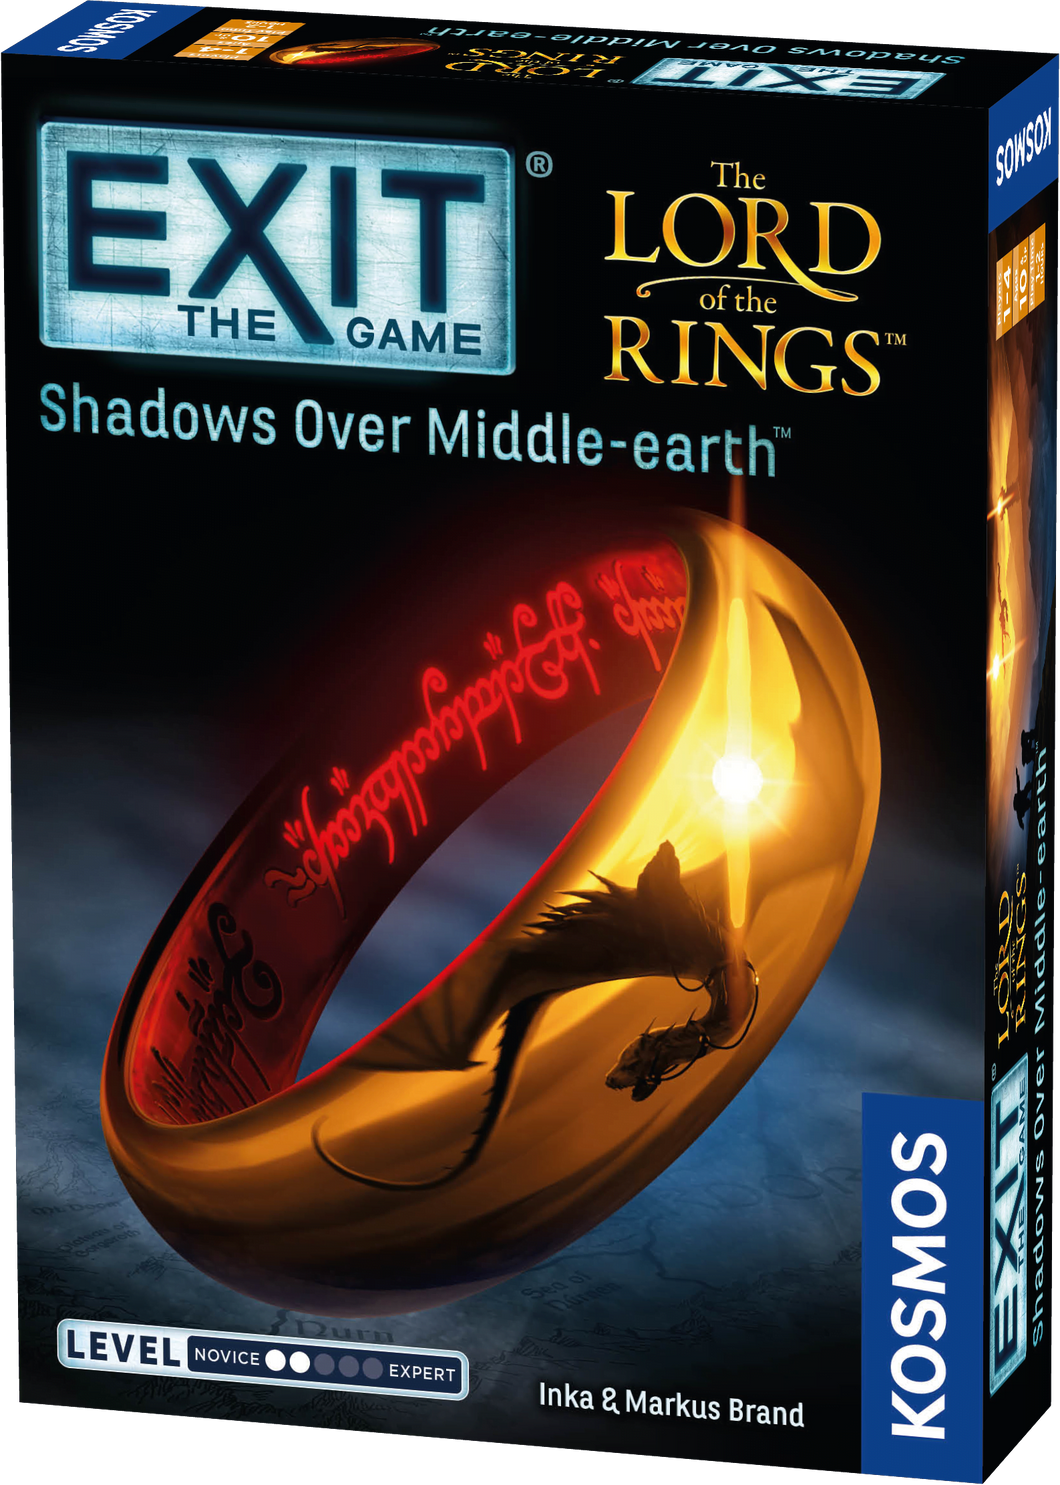 Exit The Lord of the Rings Shadows Over Middle-earth